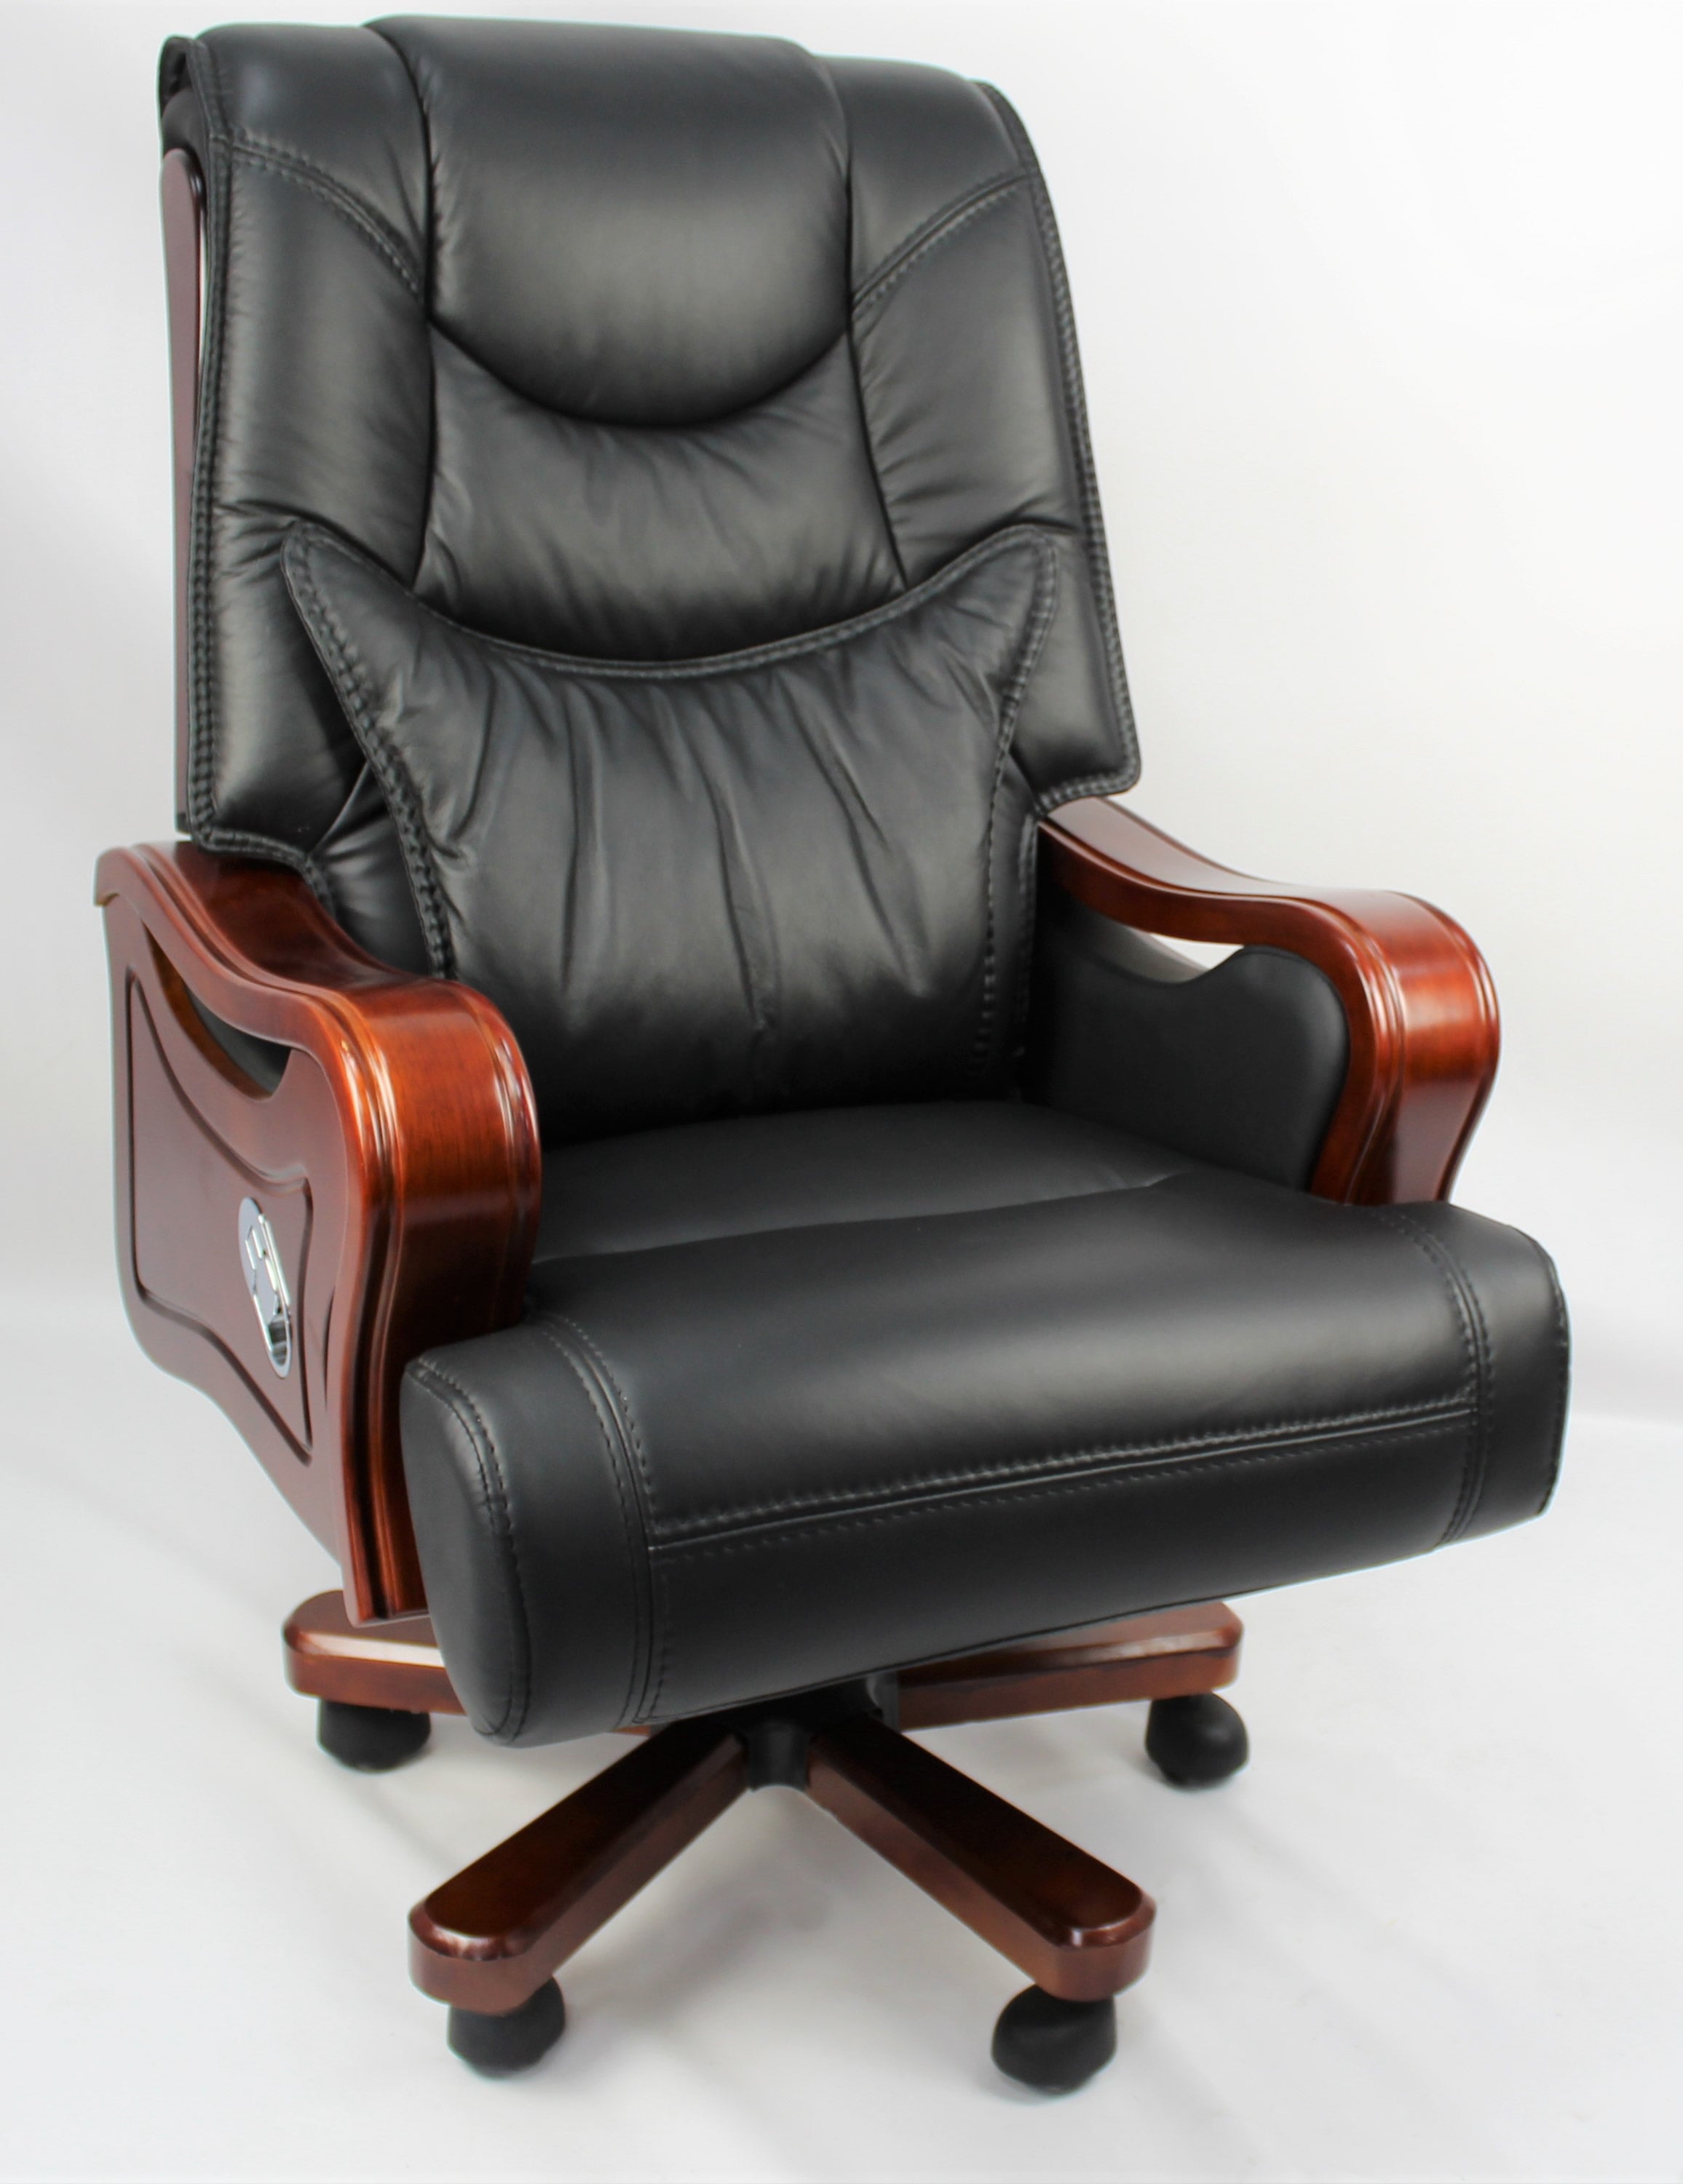 Large Executive Black Leather Office Chair with Wooden Arms - SZ-A768 UK